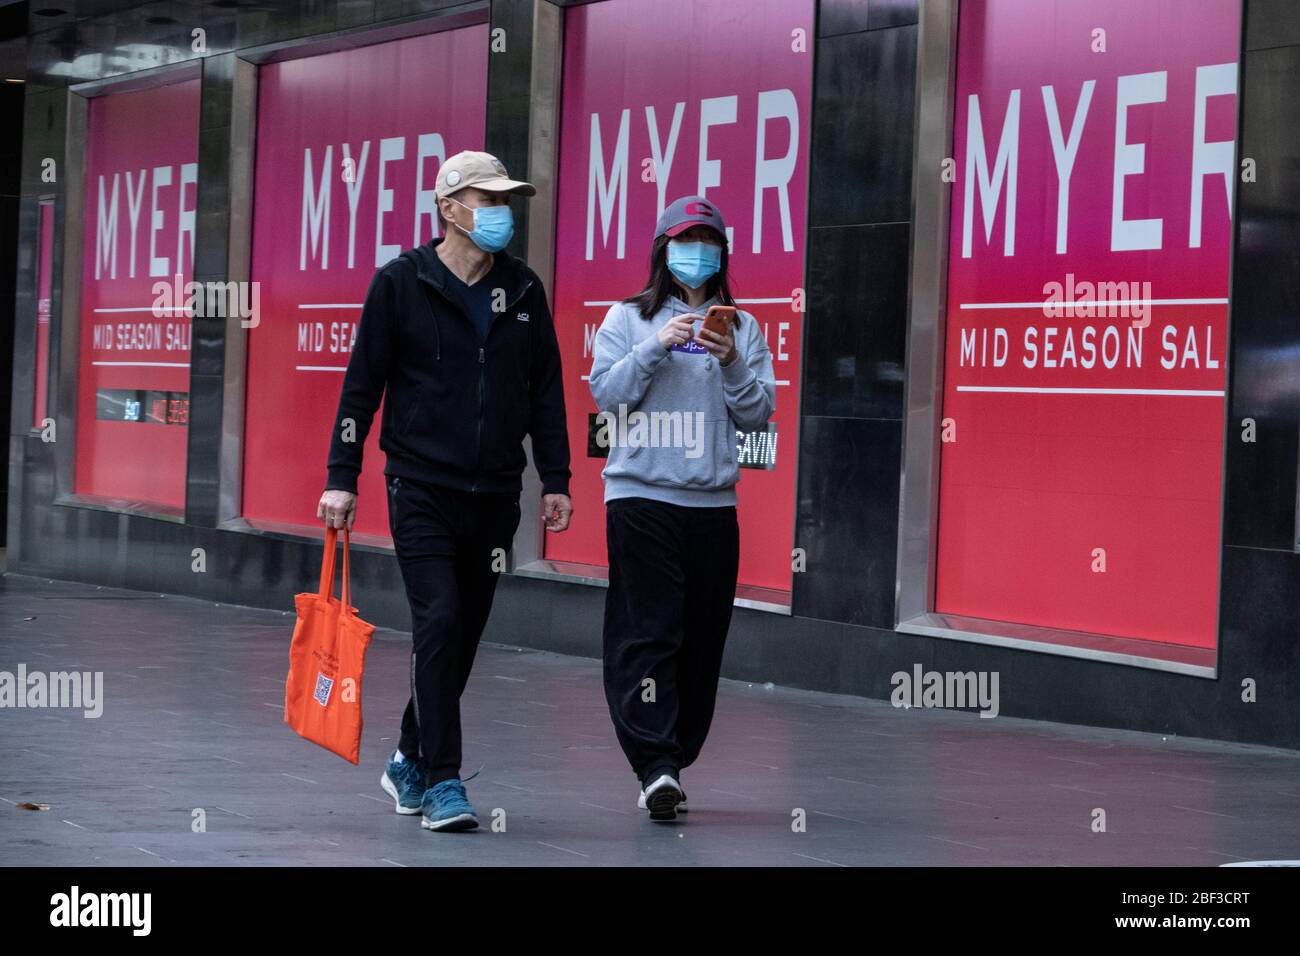 Covid pandemic crisis in Melbourne Australia  2020. Scenes of masked people shopping in and around Melbourne during lockdown. Stock Photo